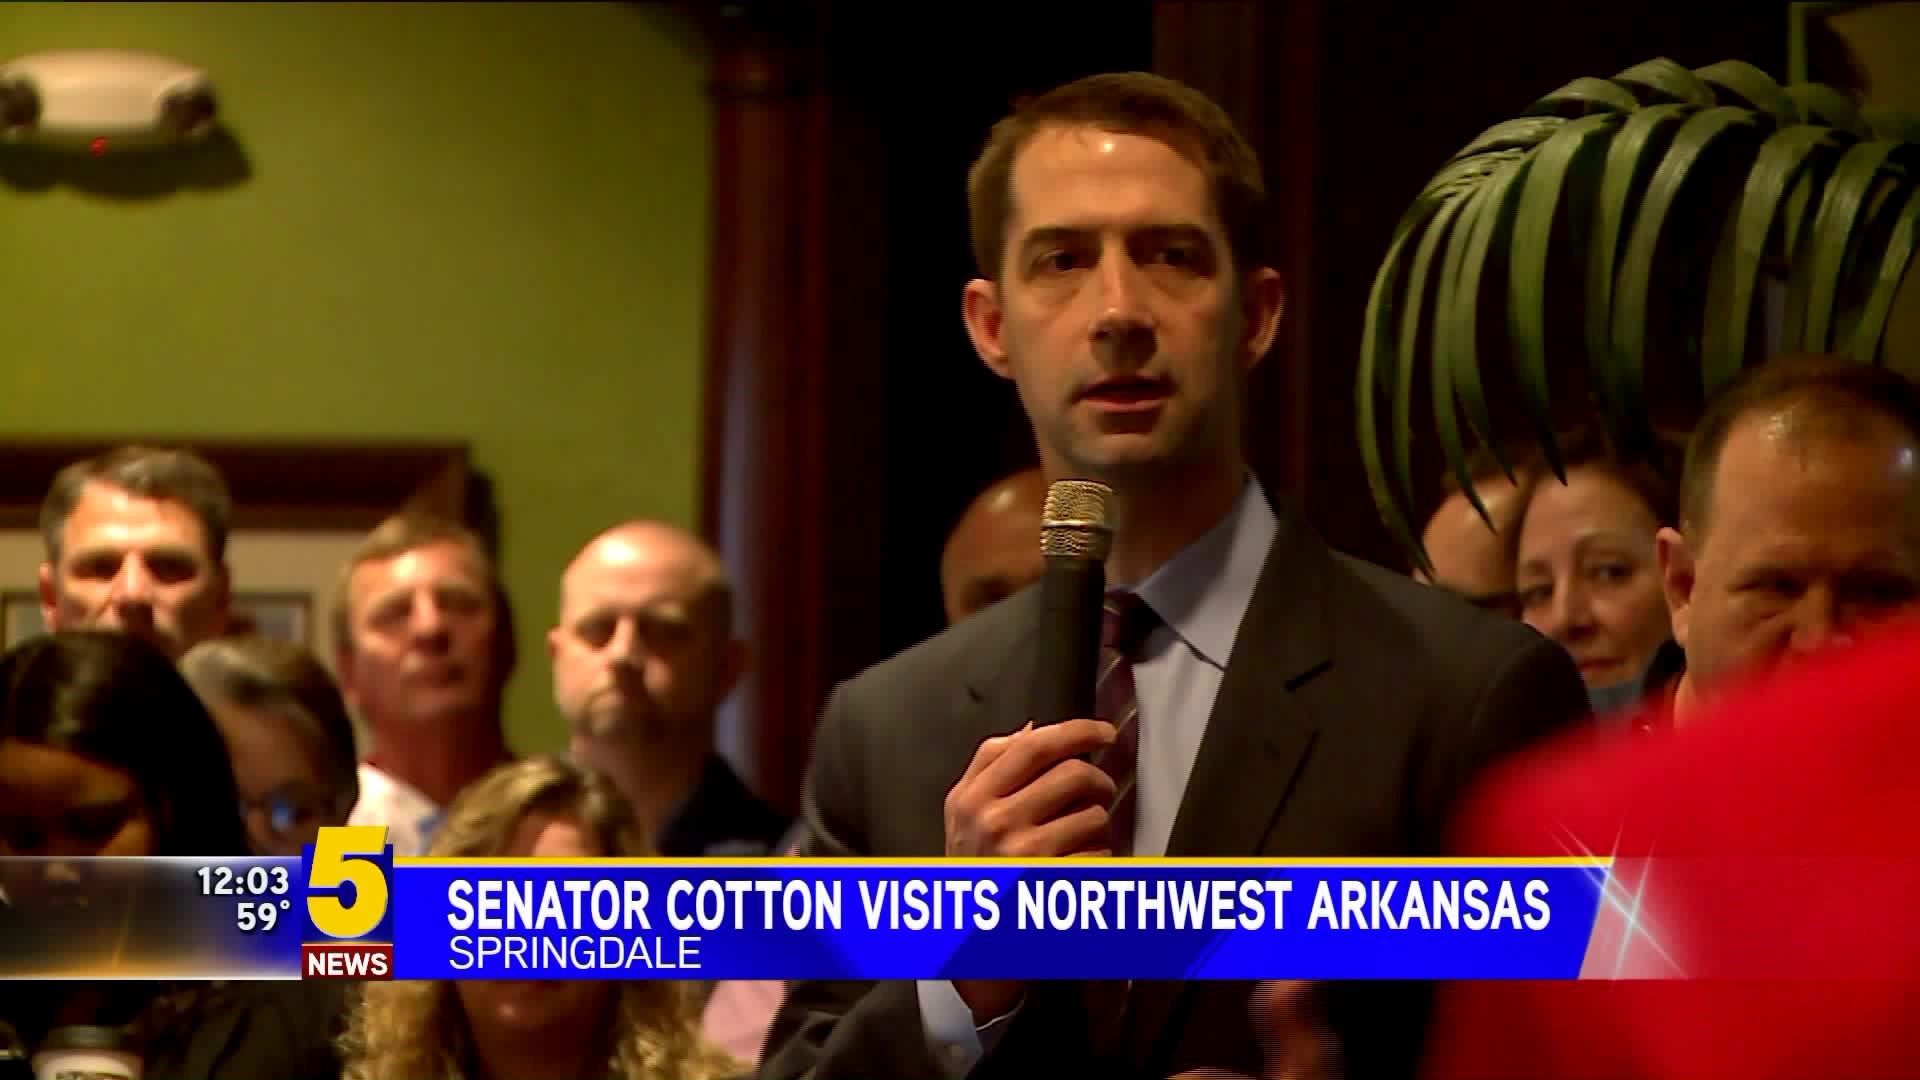 Confusion Over Cotton Event